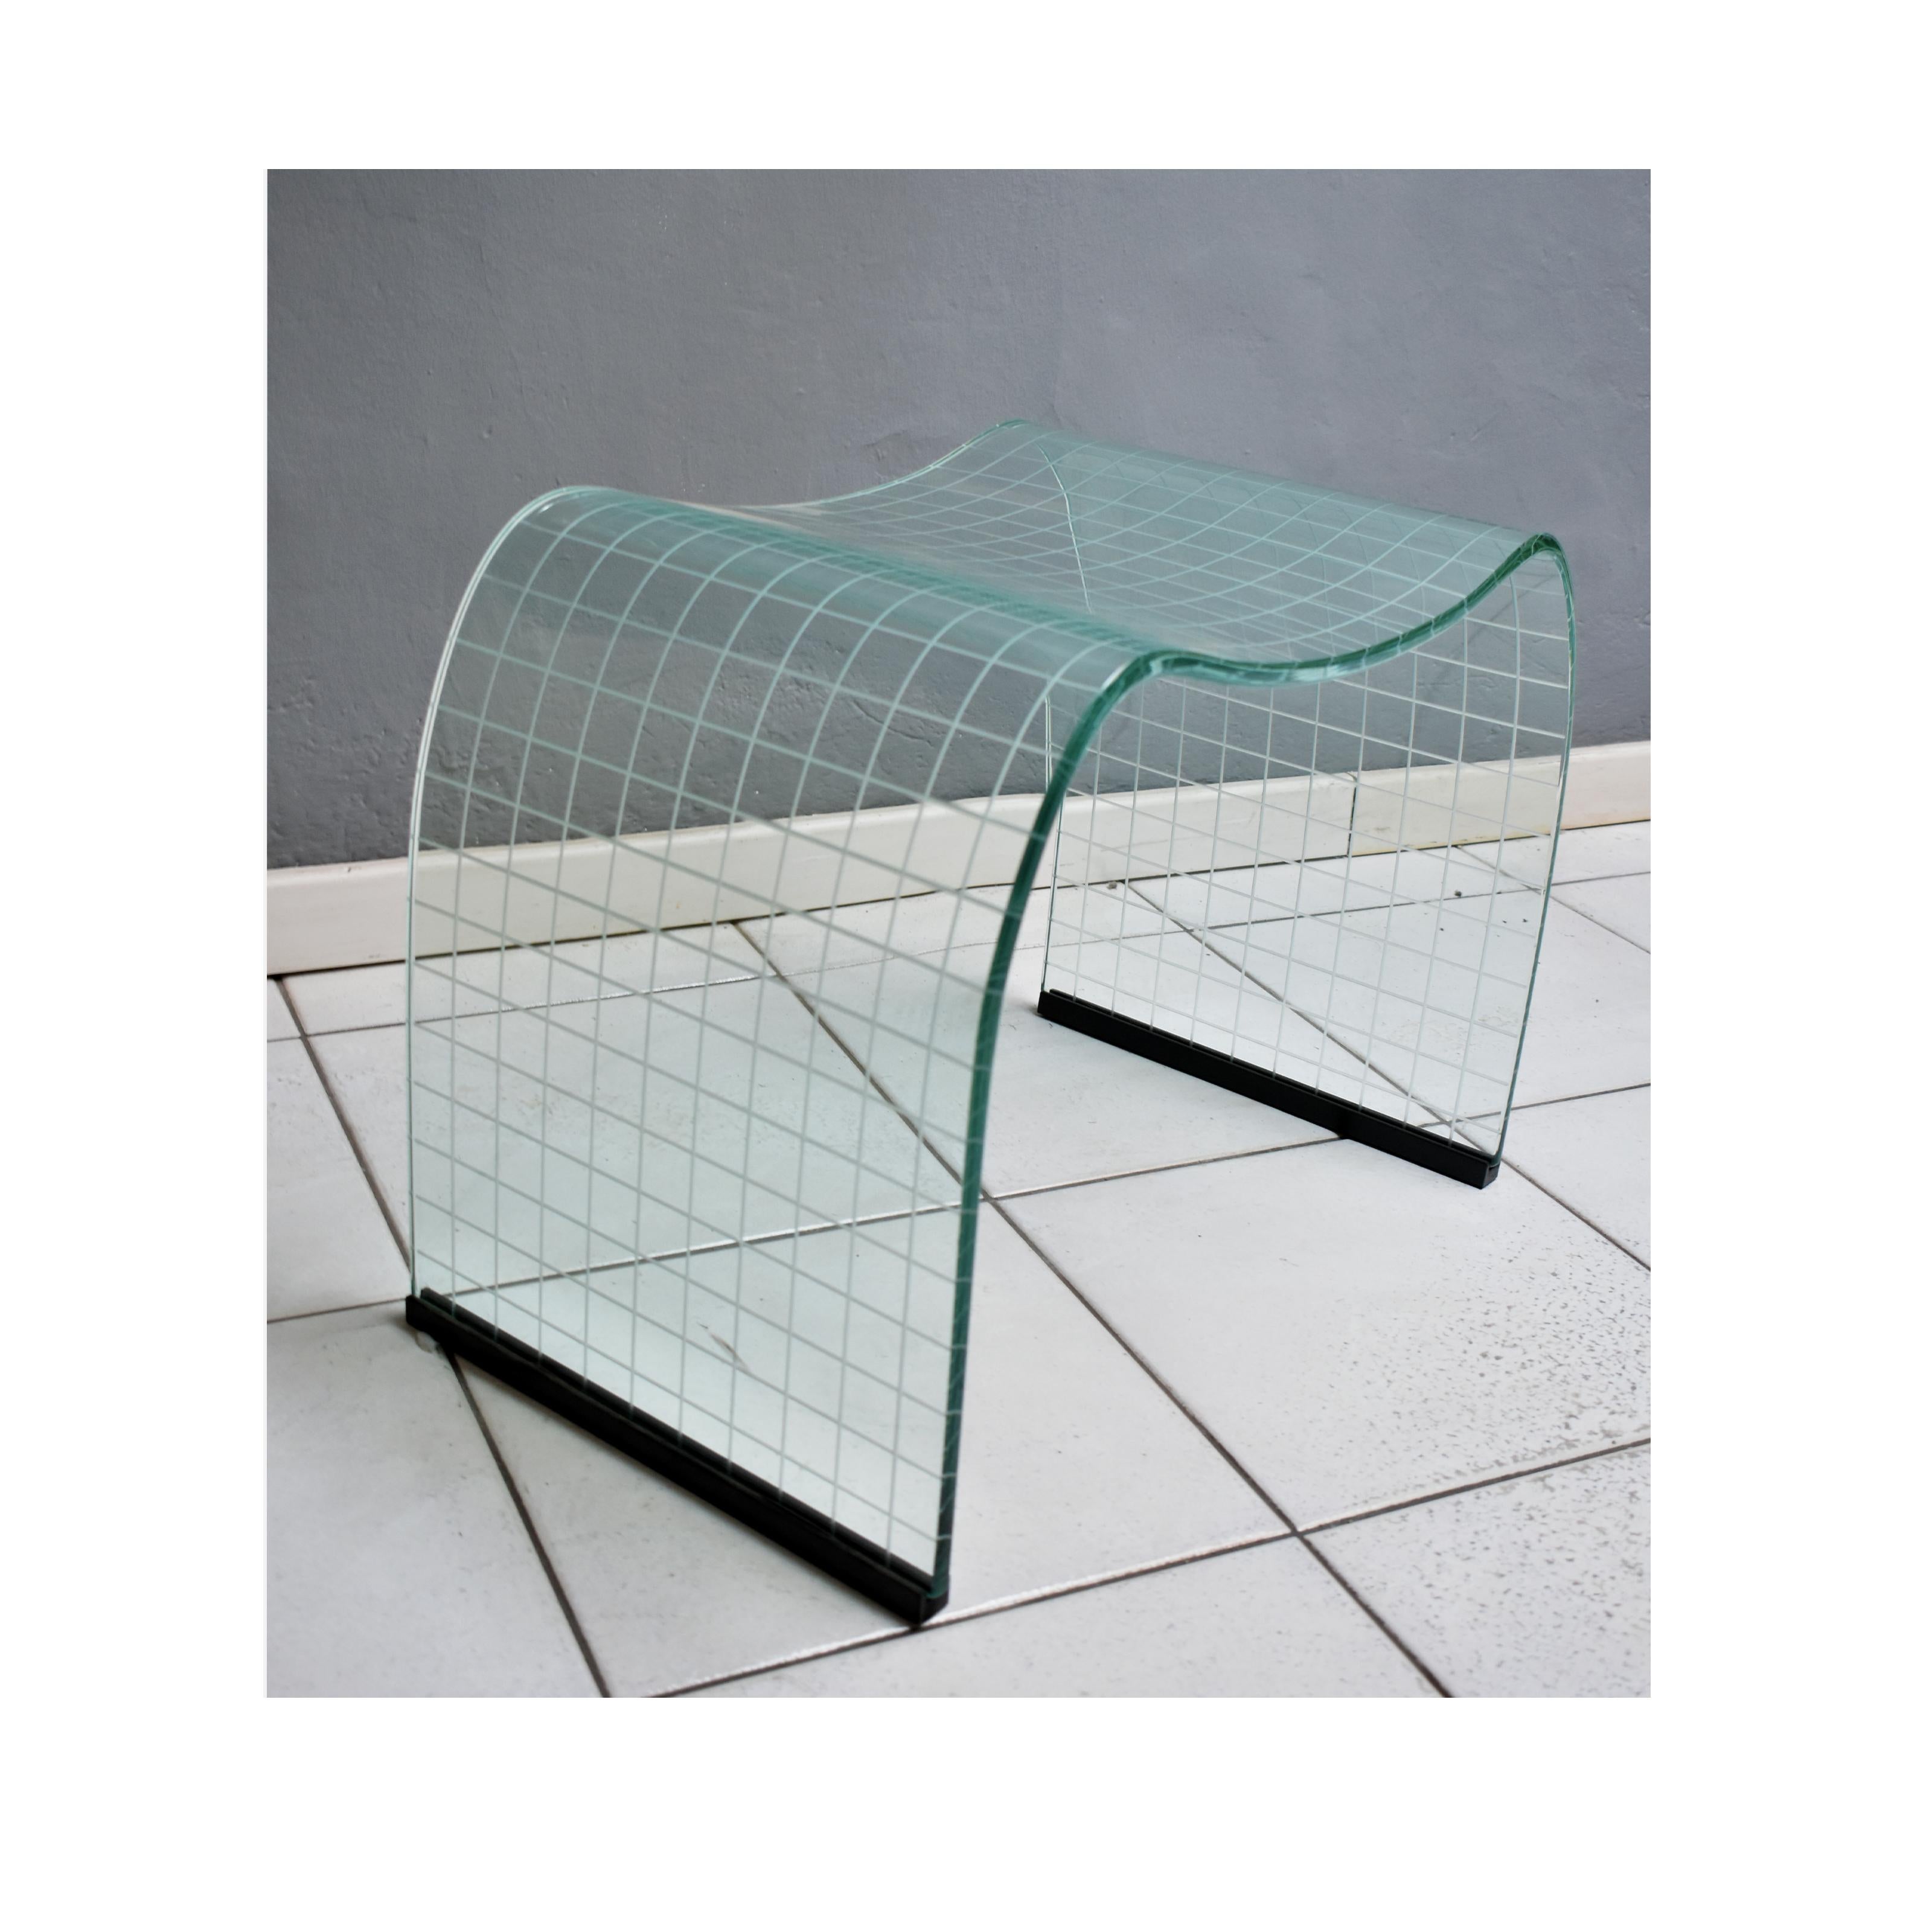 Onda incisa glass stool by Vittorio Livi for Fiam Italia, circa 1970s.
 Designed in 1973. Curved single sheet of glass with incised etched grid design. Curvaceous waterfall form. Original black plastic glides intact.
Very good condition.